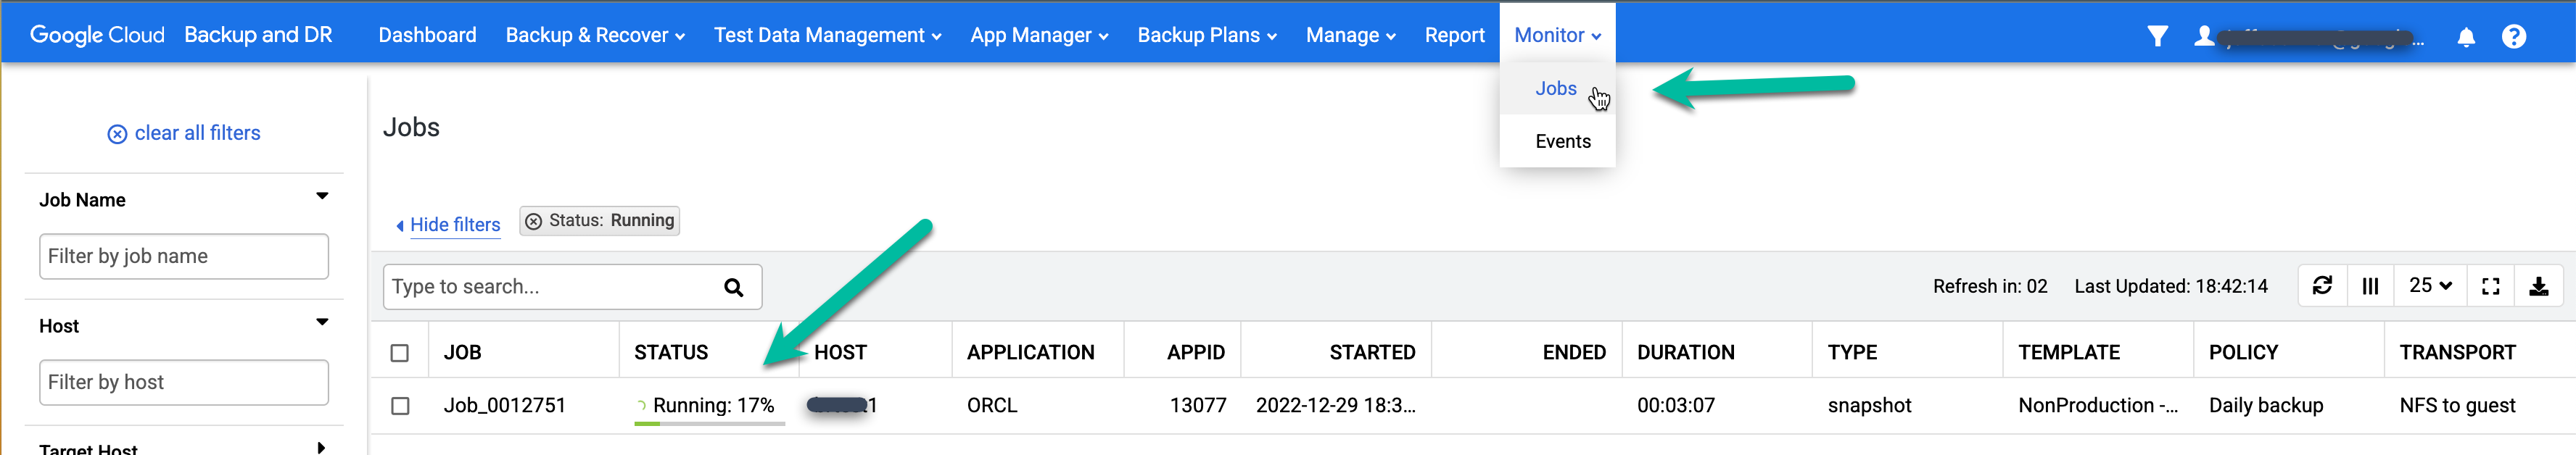 Backup and DR management console page that shows a running backup job.